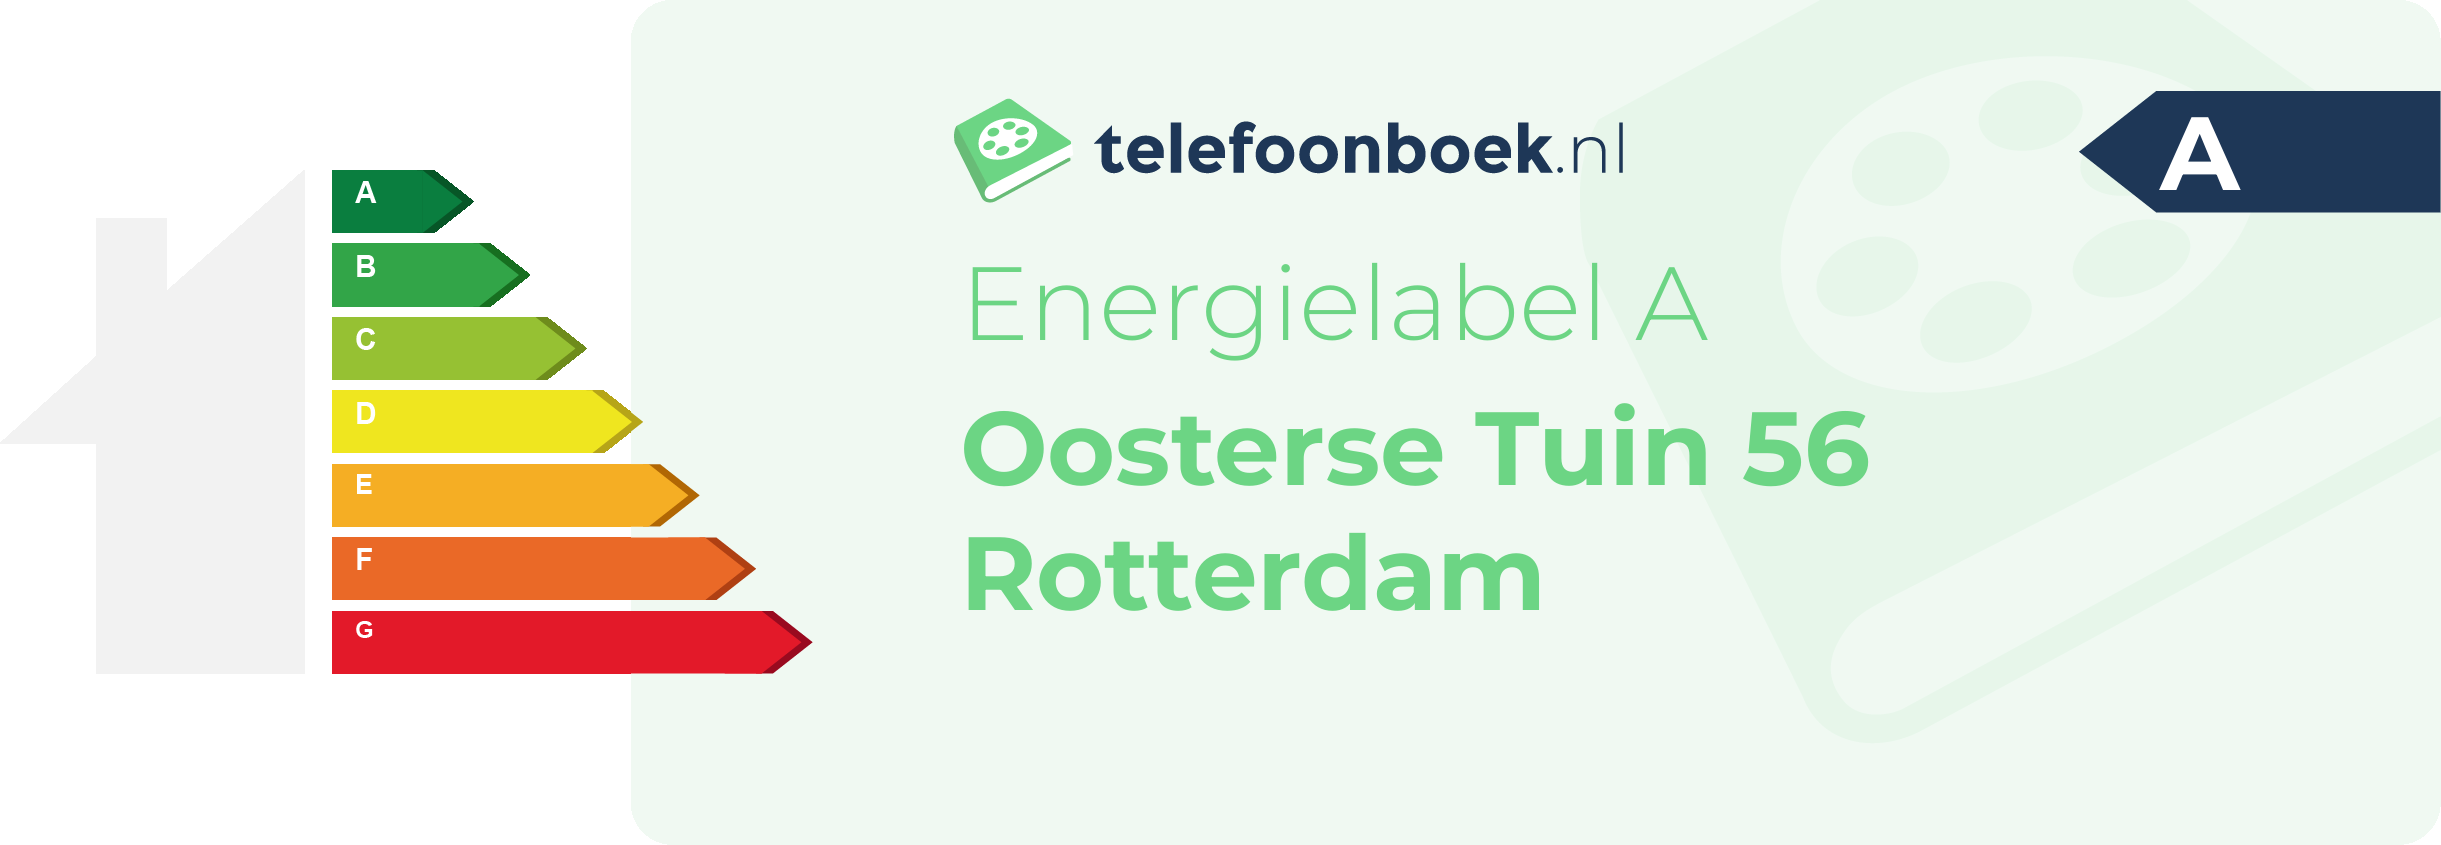 Energielabel Oosterse Tuin 56 Rotterdam